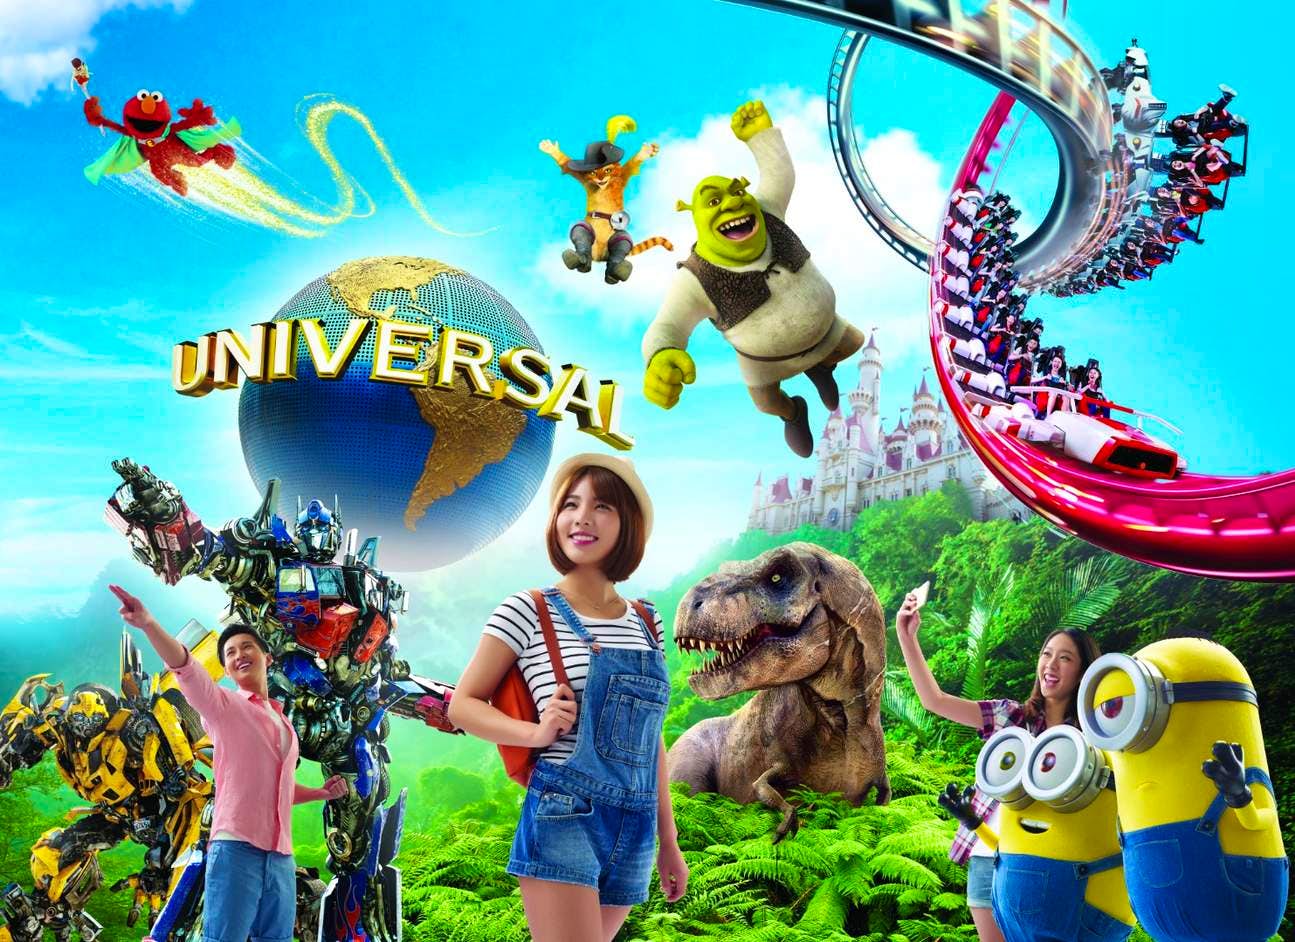 Universal Studios Admissions (Operational Days - Wed, Thu, Fri, Sat, Sun) (For Visit Dates: Till 25 May)